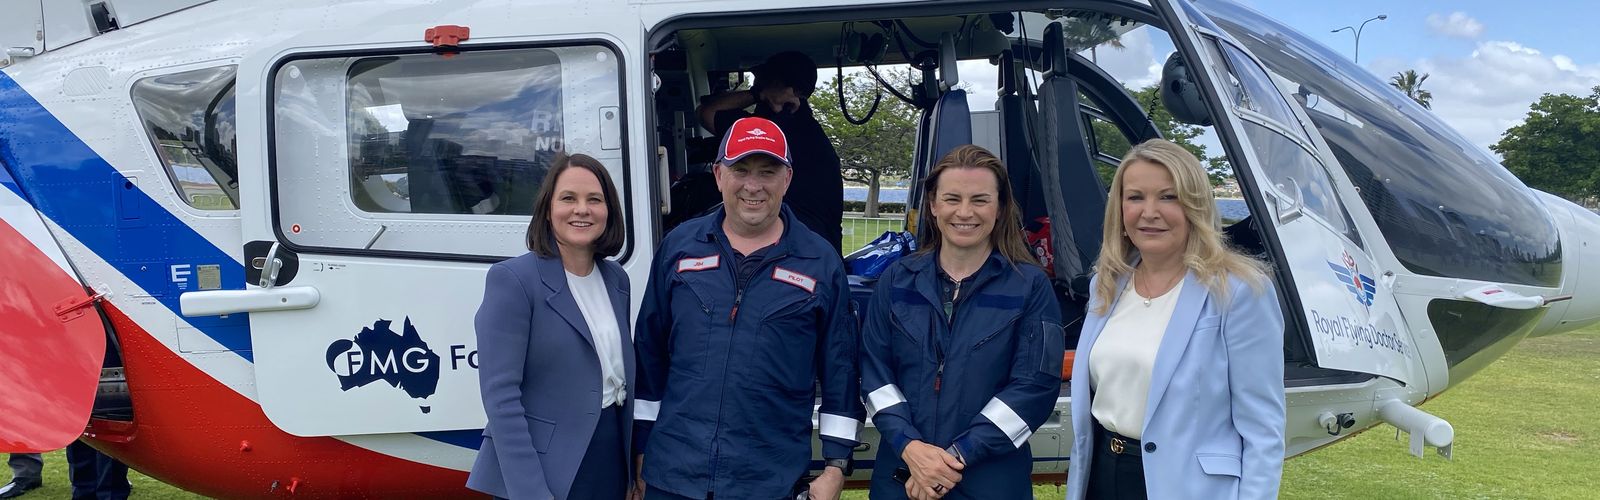 RFDS and FMG partnership 